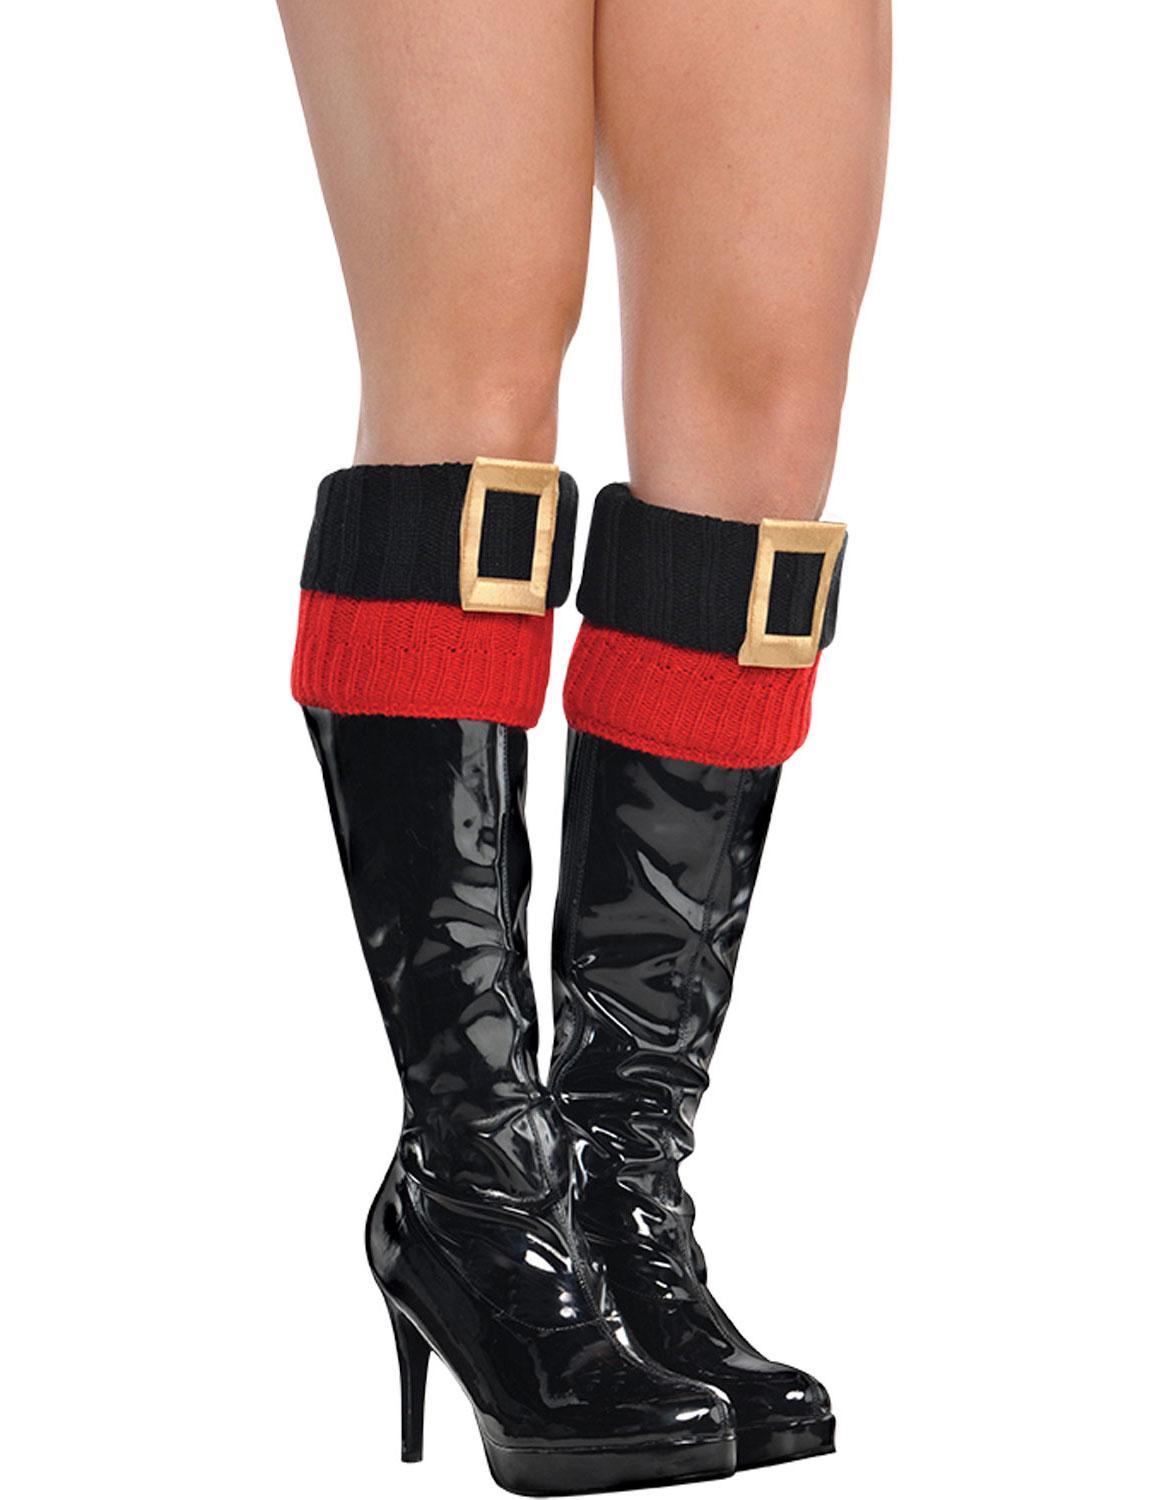 Miss Santa 'Santa Belt' Boot Cuffs by Amscan 845171 available here at Karnival Costumes online Christmas party shop